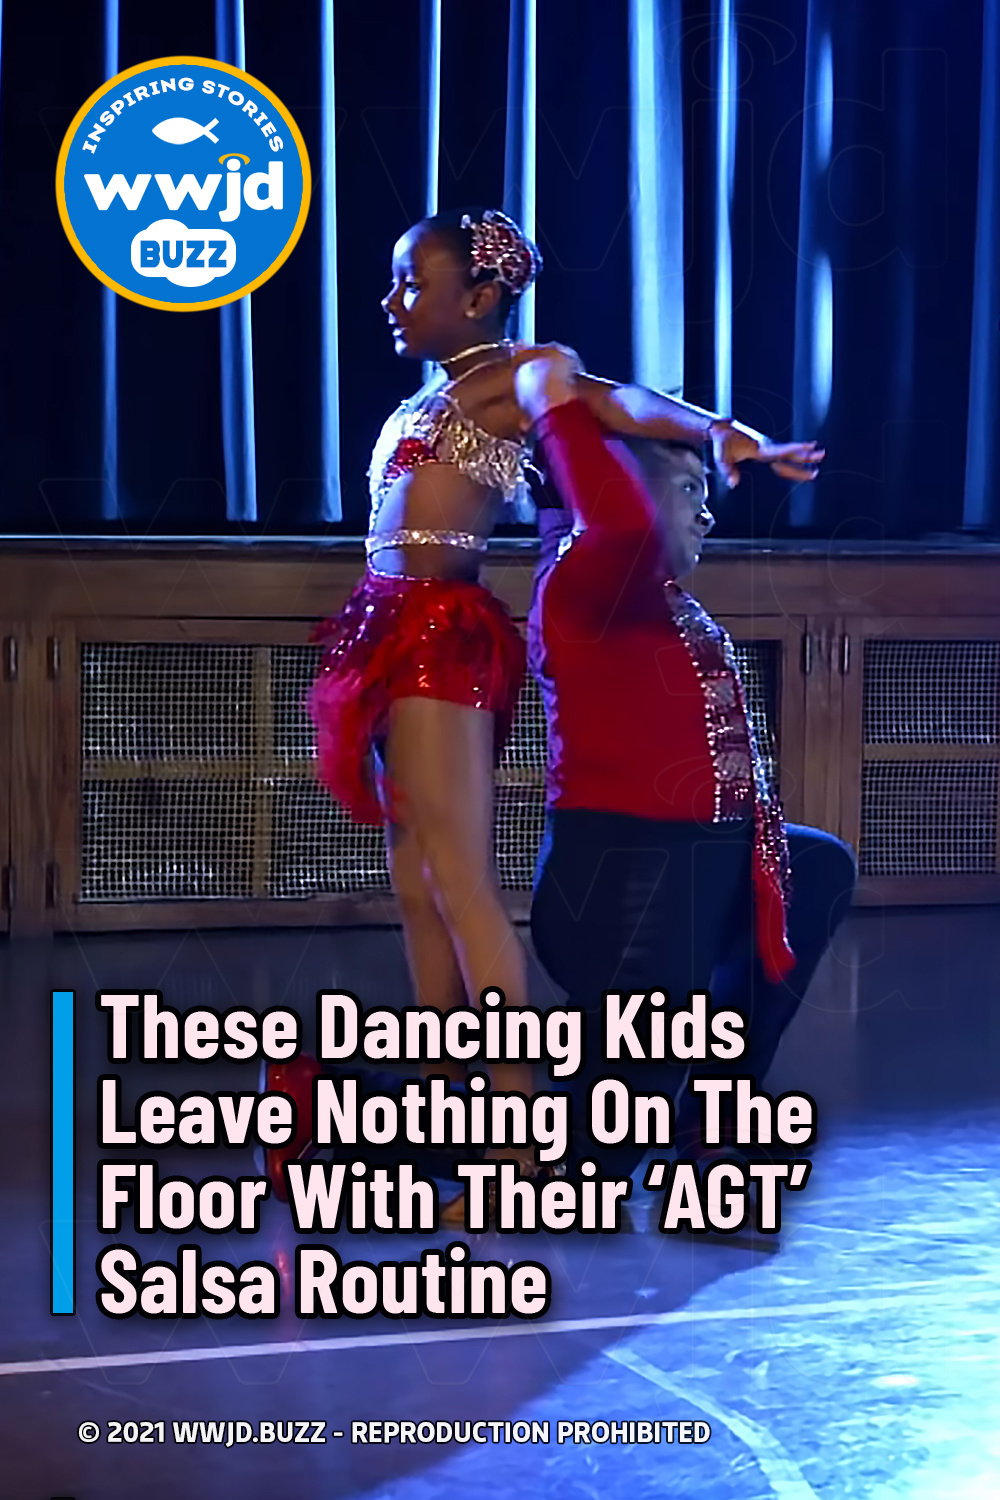 These Dancing Kids Leave Nothing On The Floor With Their ‘AGT’ Salsa Routine